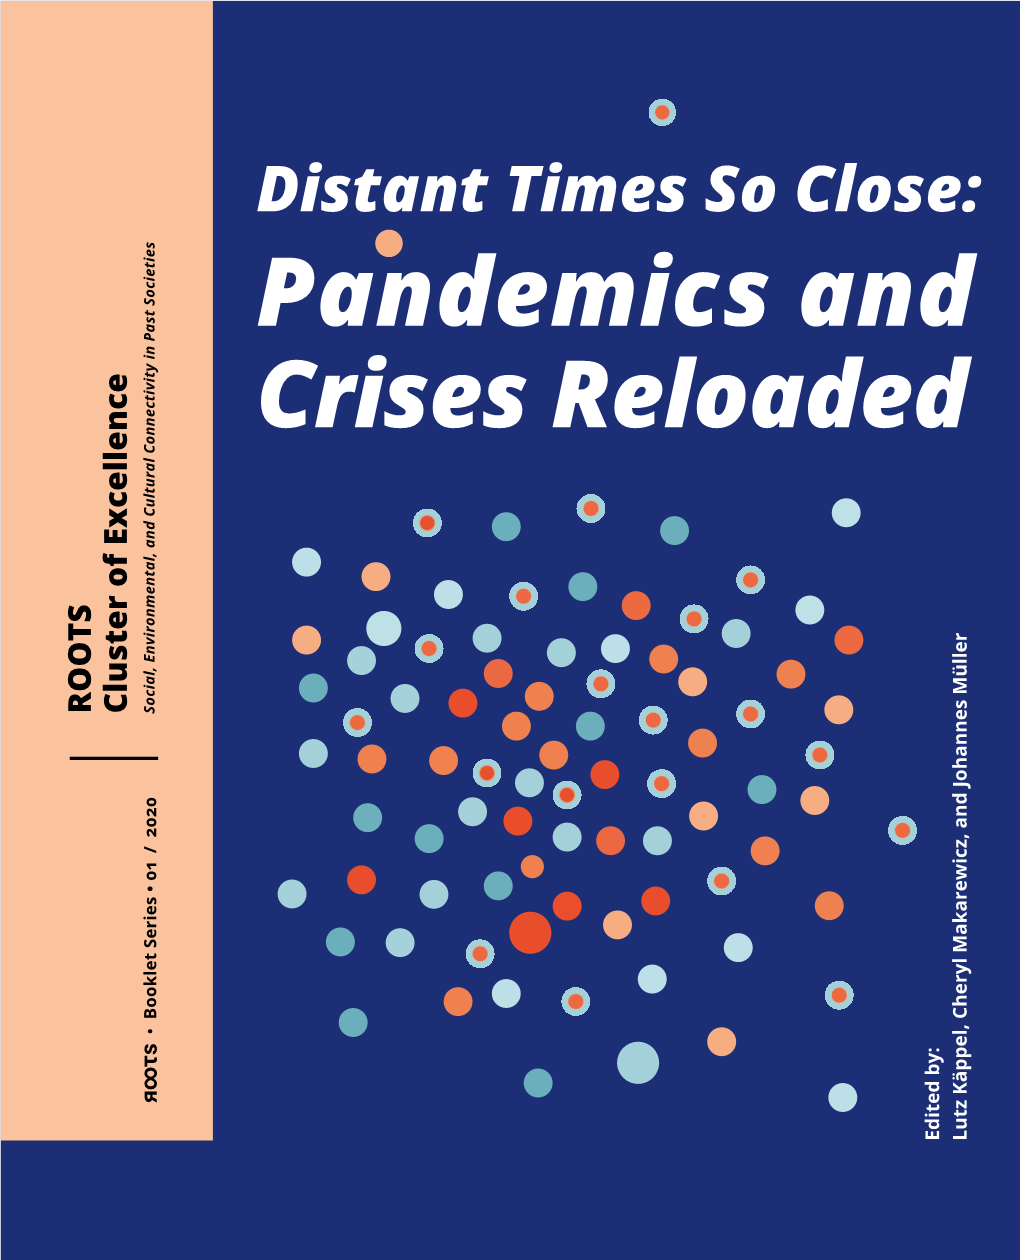 Pandemics and Crises Reloaded ROOTS Cluster of Excellence • Booklet Series • 01 / 2020 Edited By: Lutz Käppel, Cheryl Makarewicz, and Johannes Müller